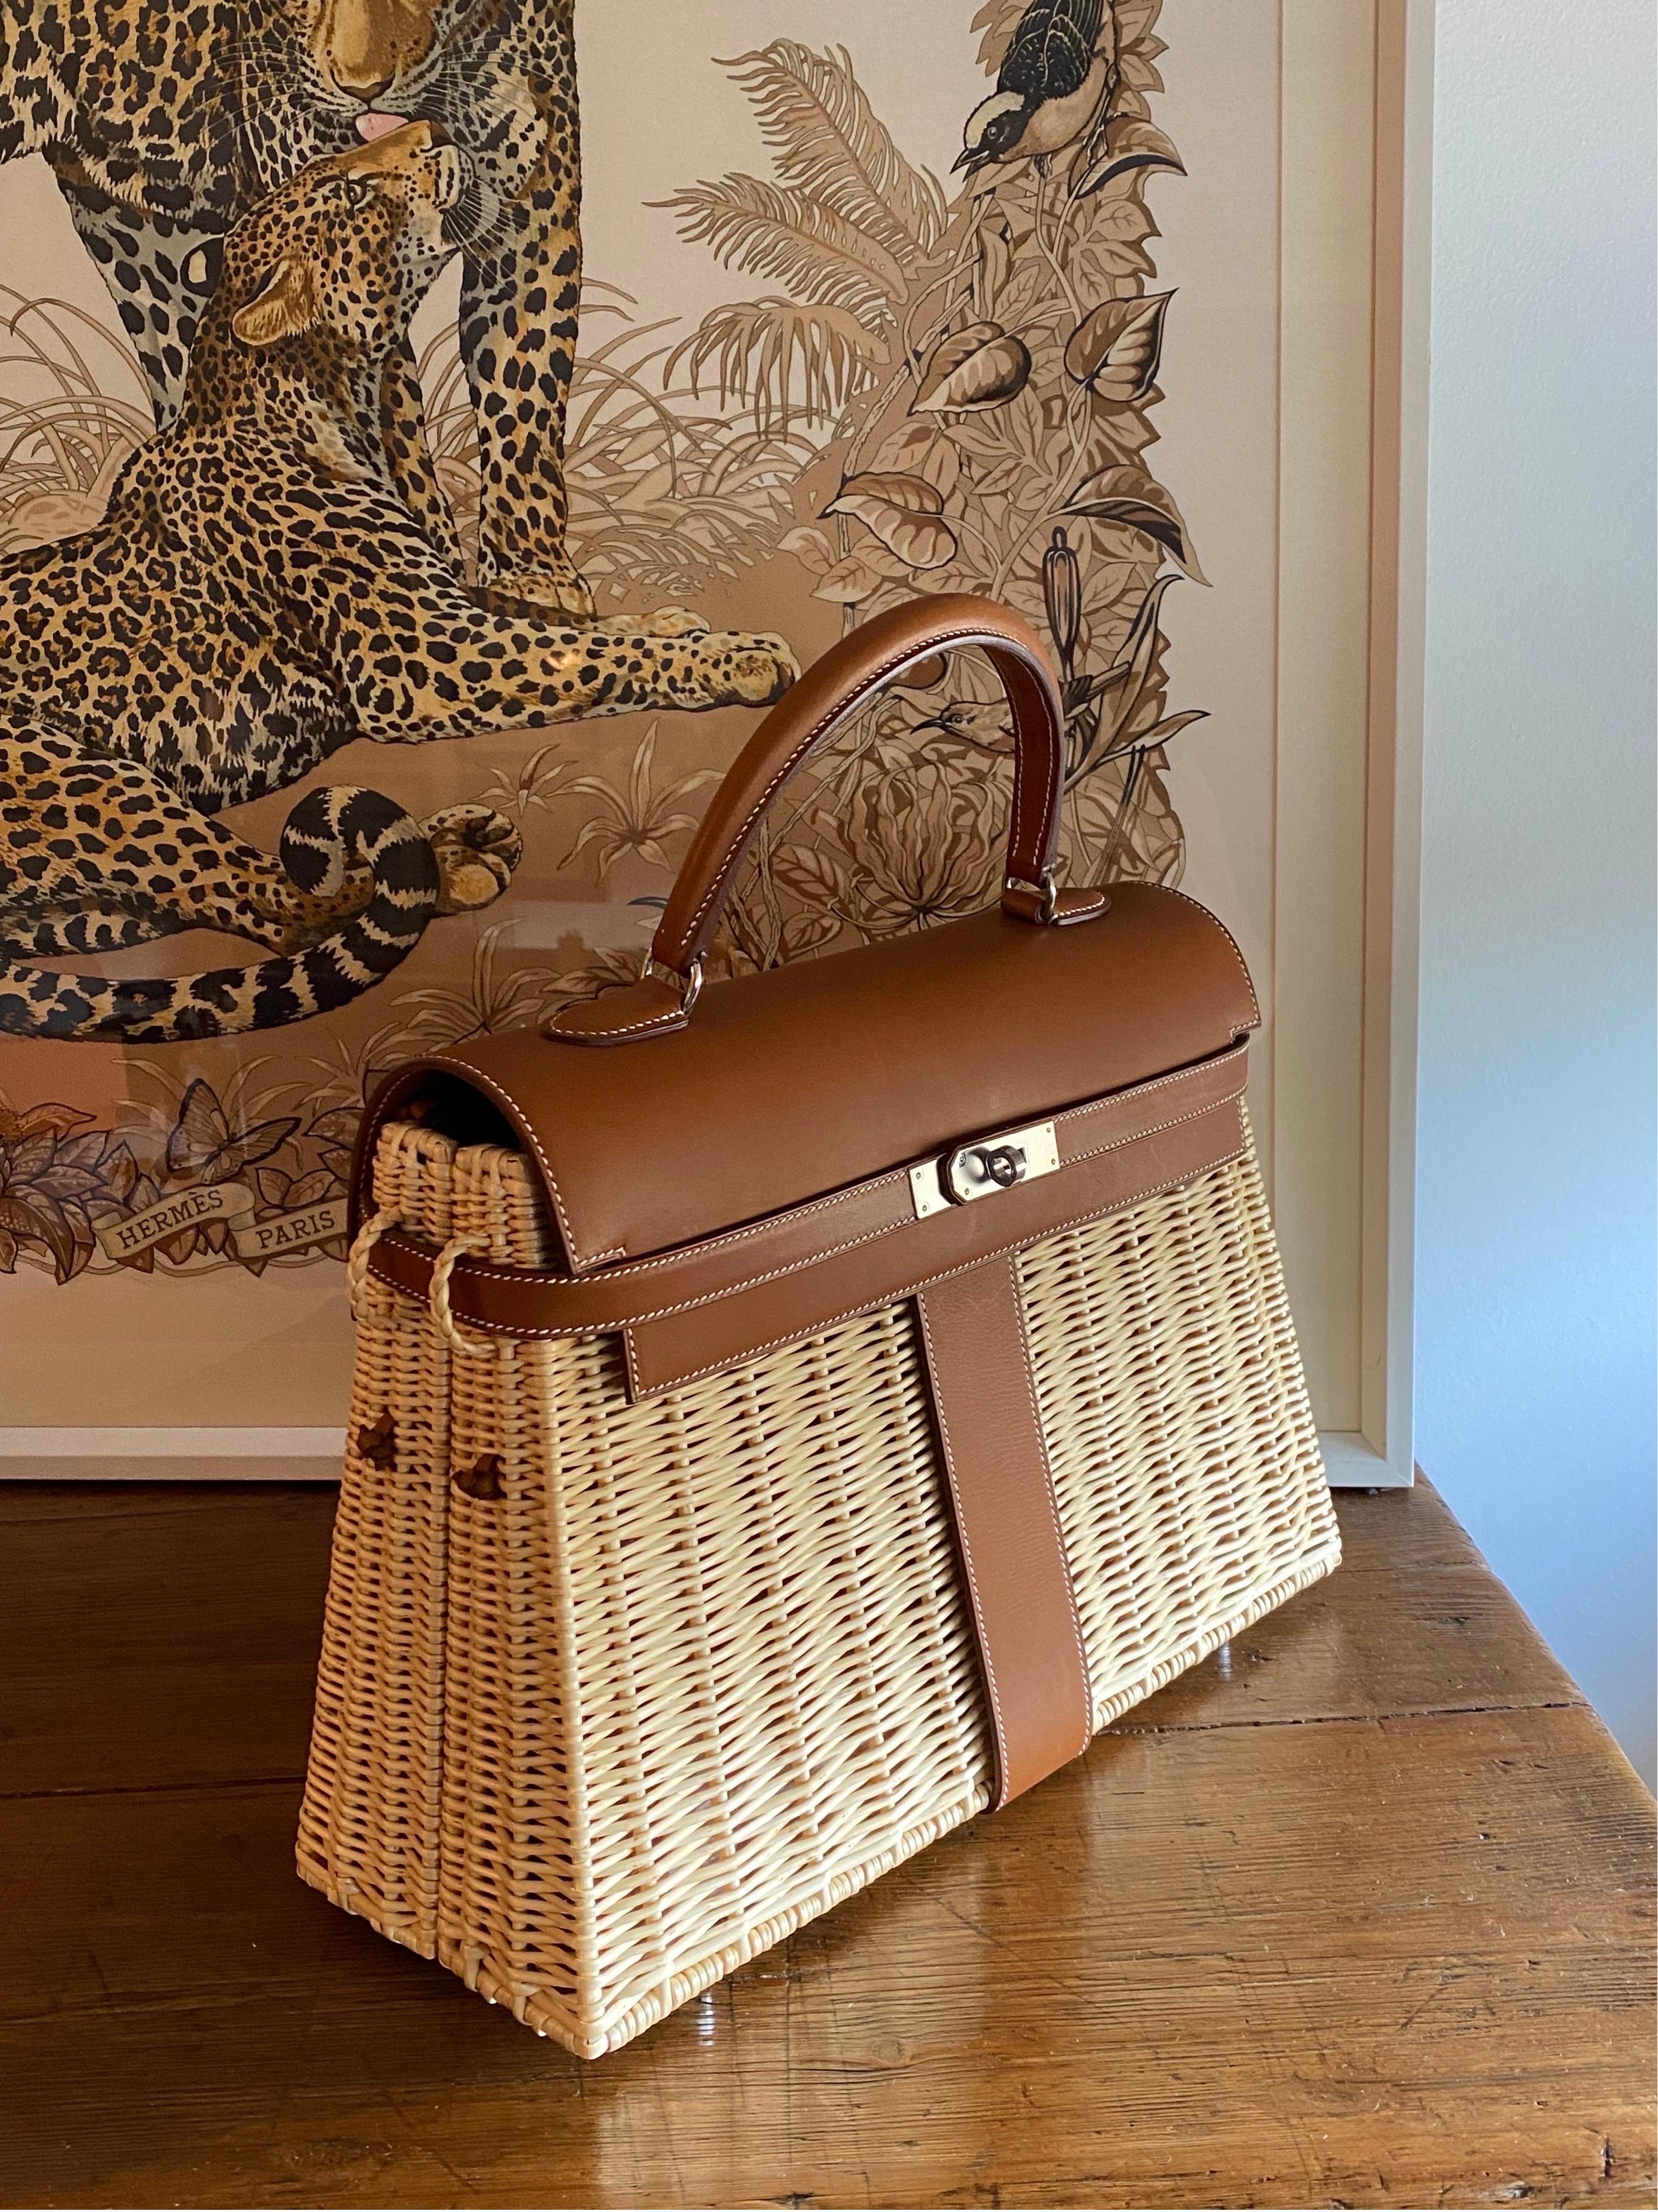 Hermes Picnic Kelly bag.

Crafted in France, this extremely rare and highly sought bag is a true testament to the quality of the house's craftsmanship, exuding timeless style and elegance. 35cm in size, this unique piece features a distinctive